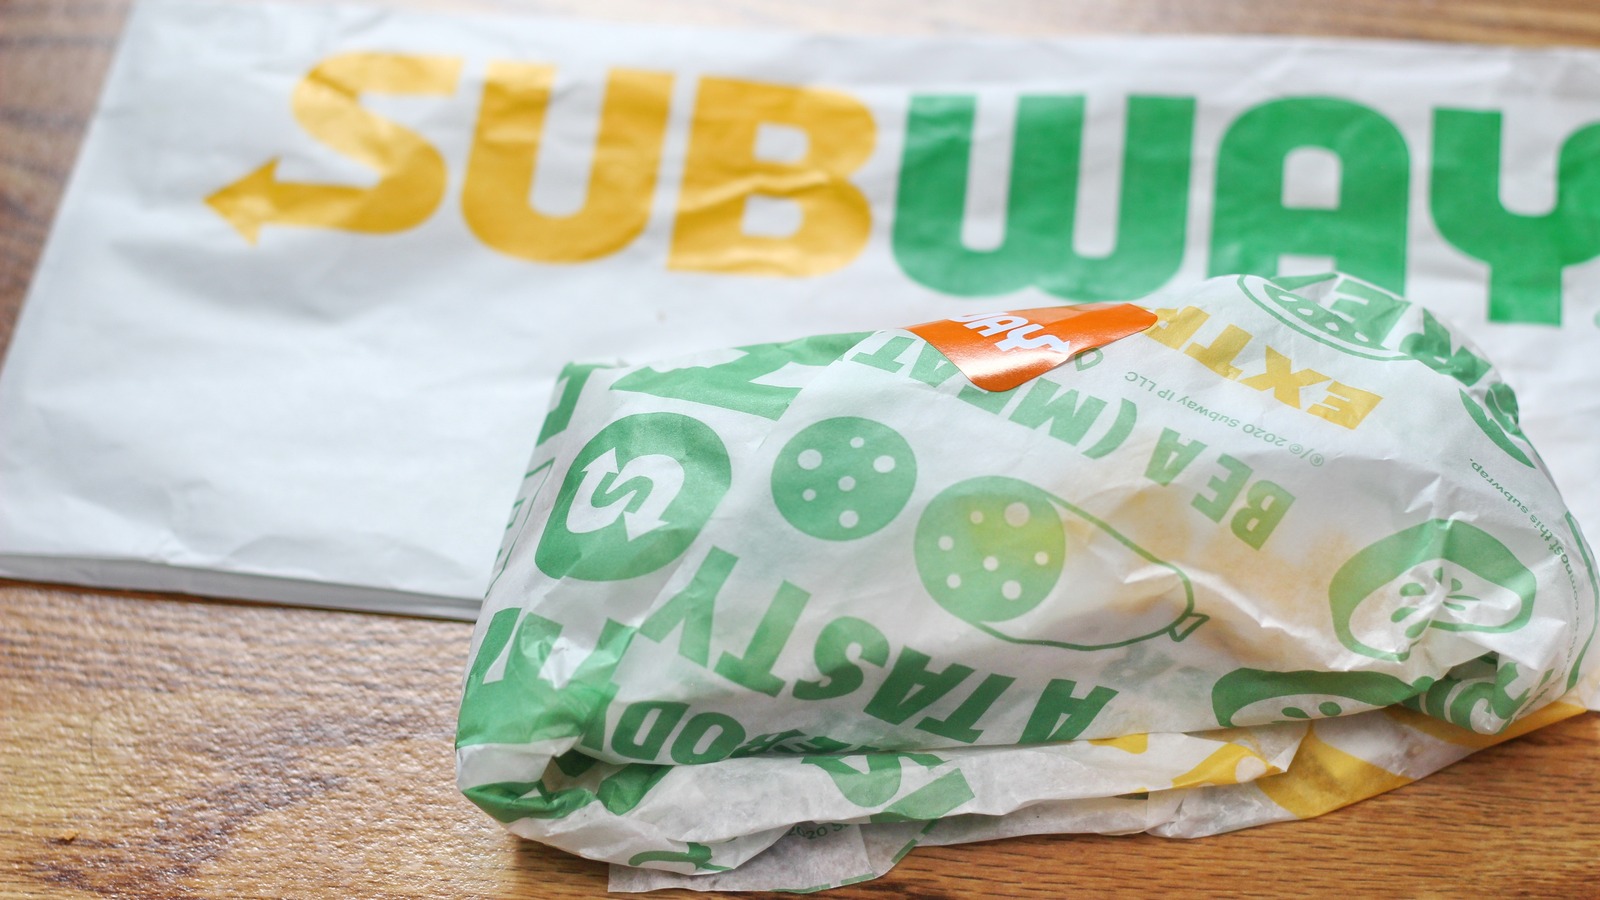 reddit-has-some-strong-opinions-about-subway-s-ingredient-names